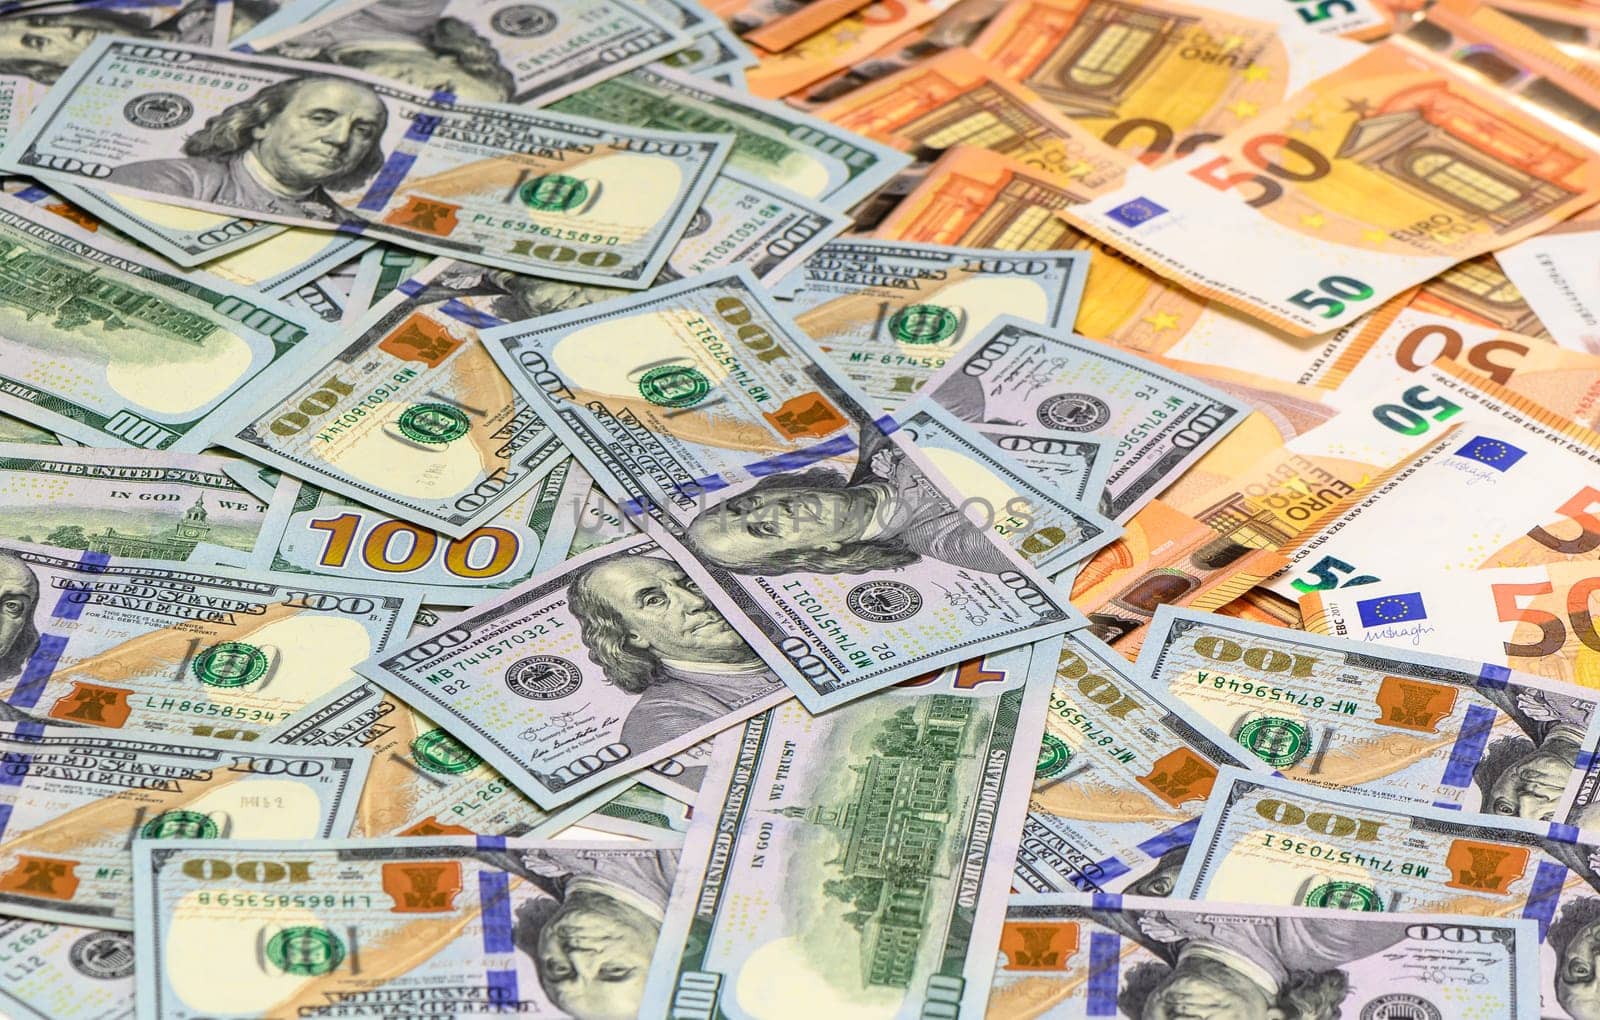 Banknotes of 100 dollars and 50 euros as a background close-up by Mixa74